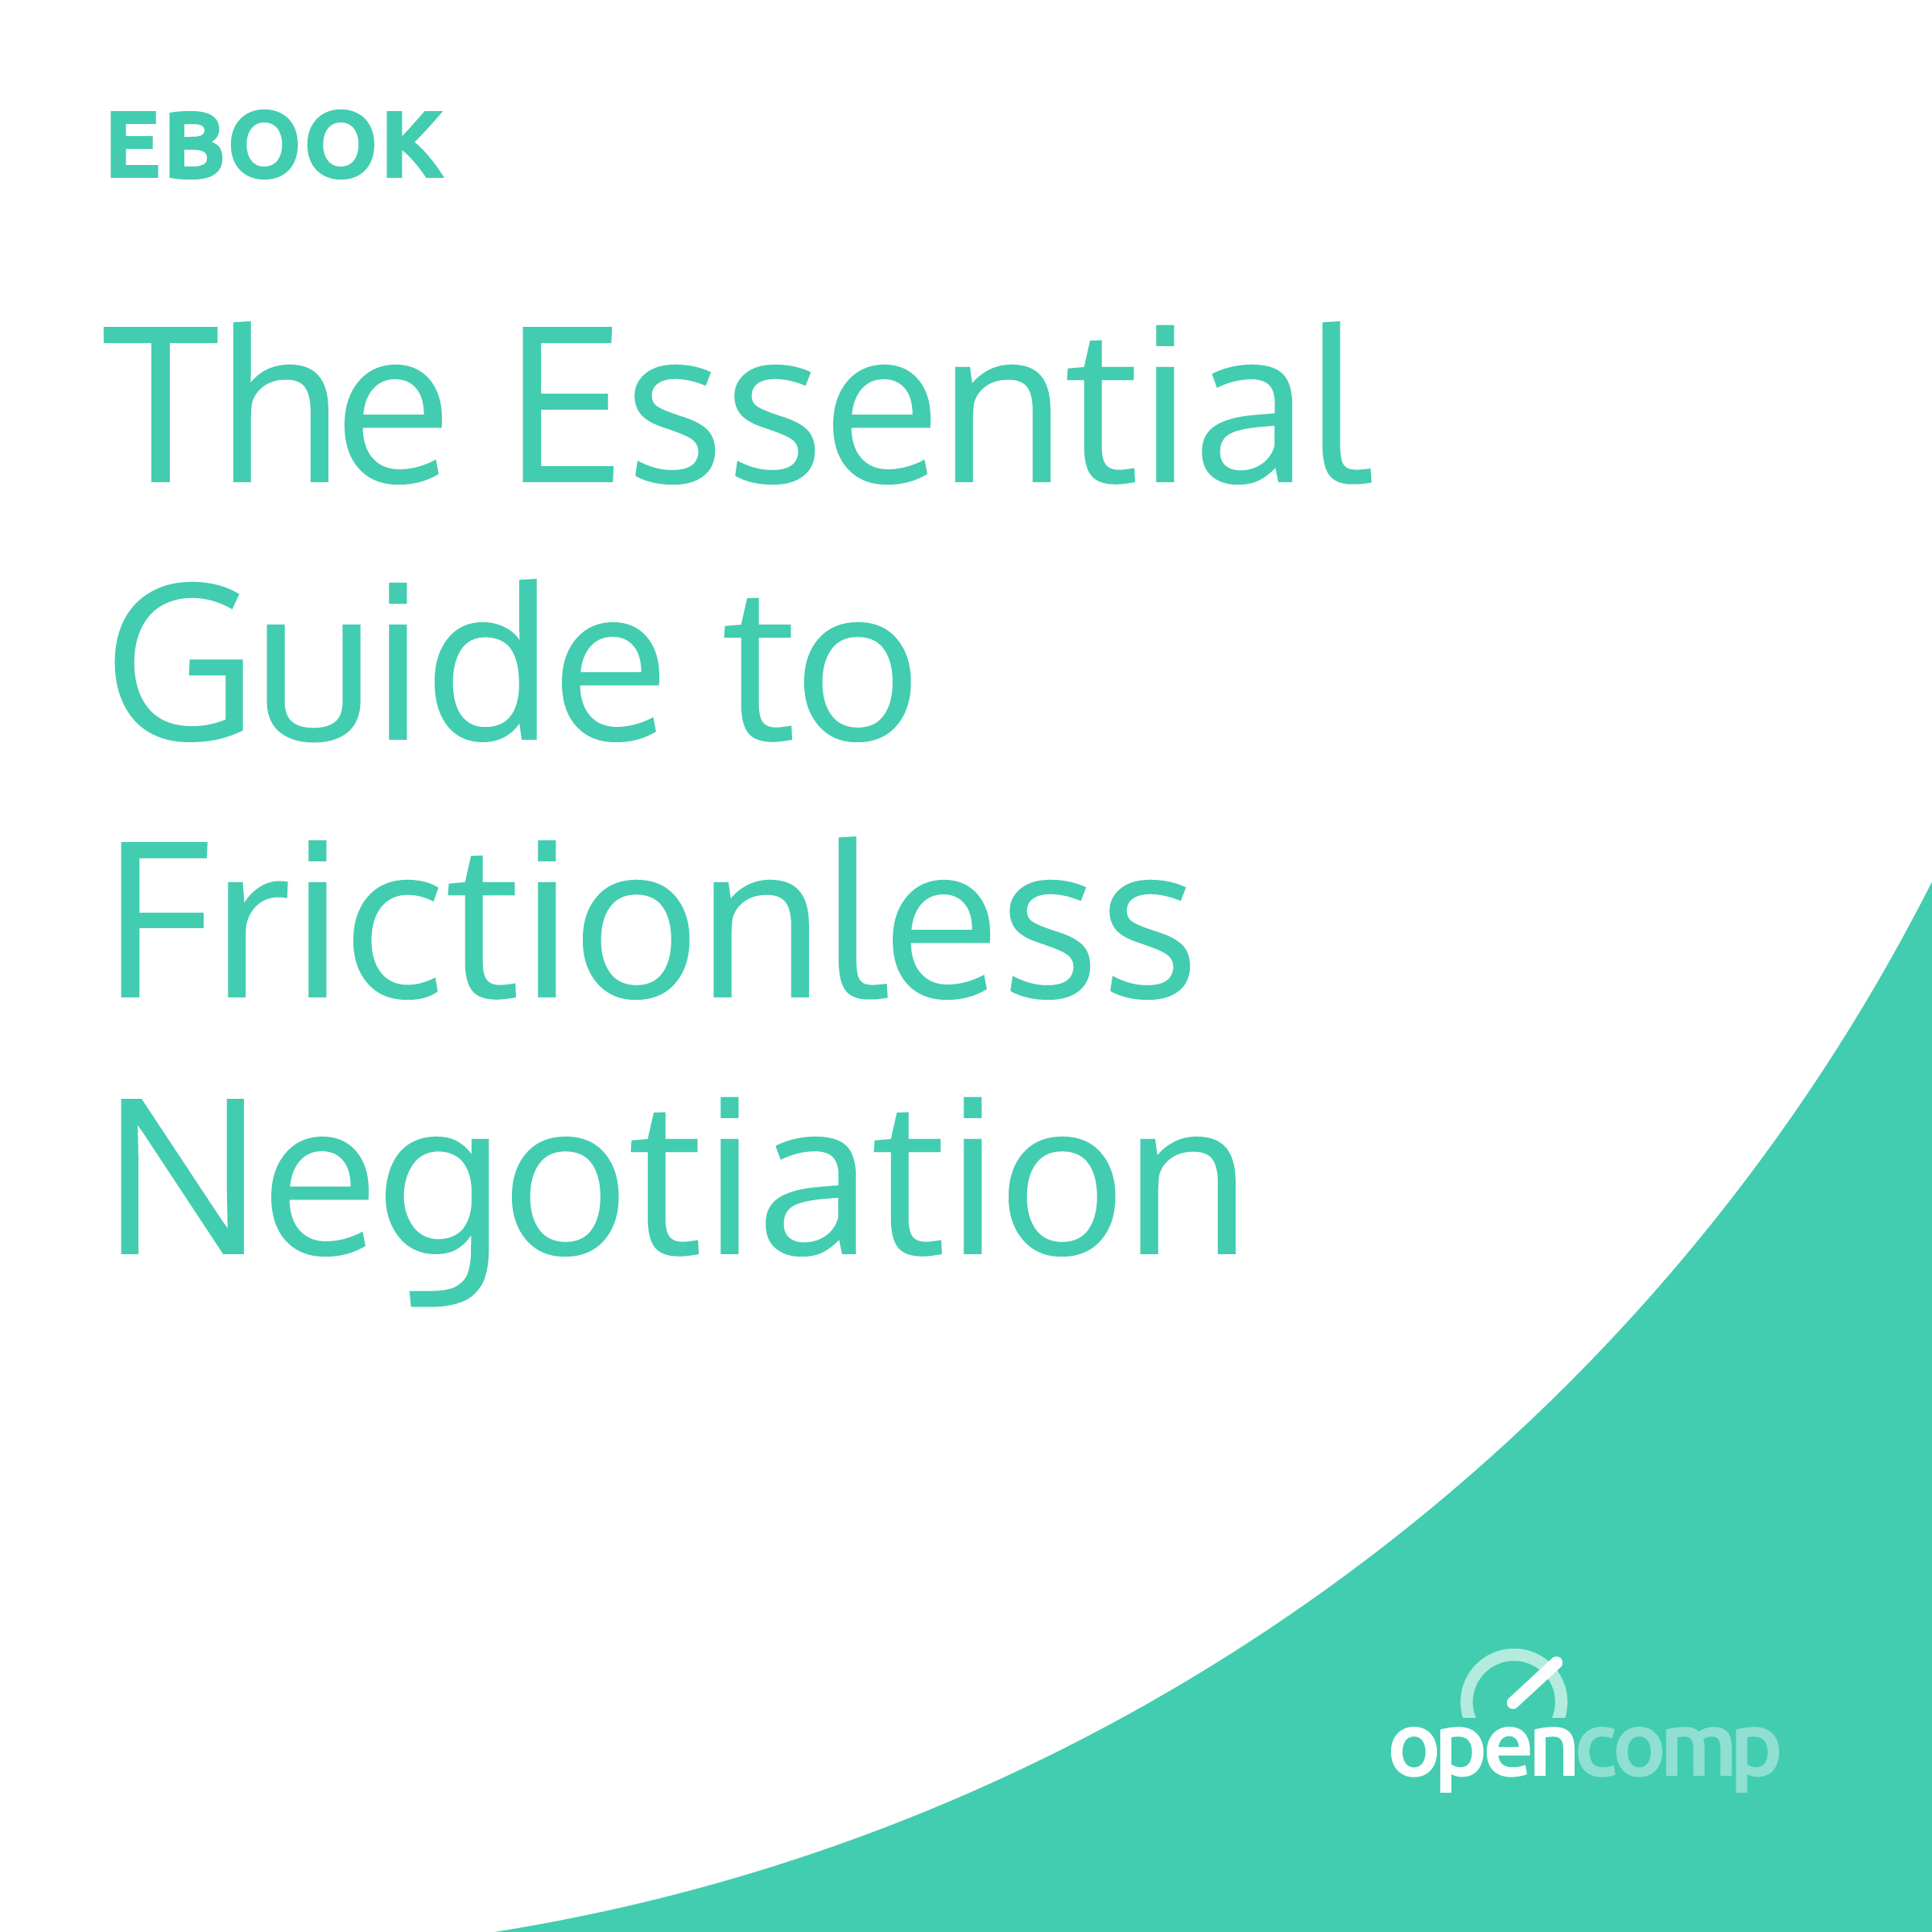 eBook: The Essential Guide to Frictionless Negotiation